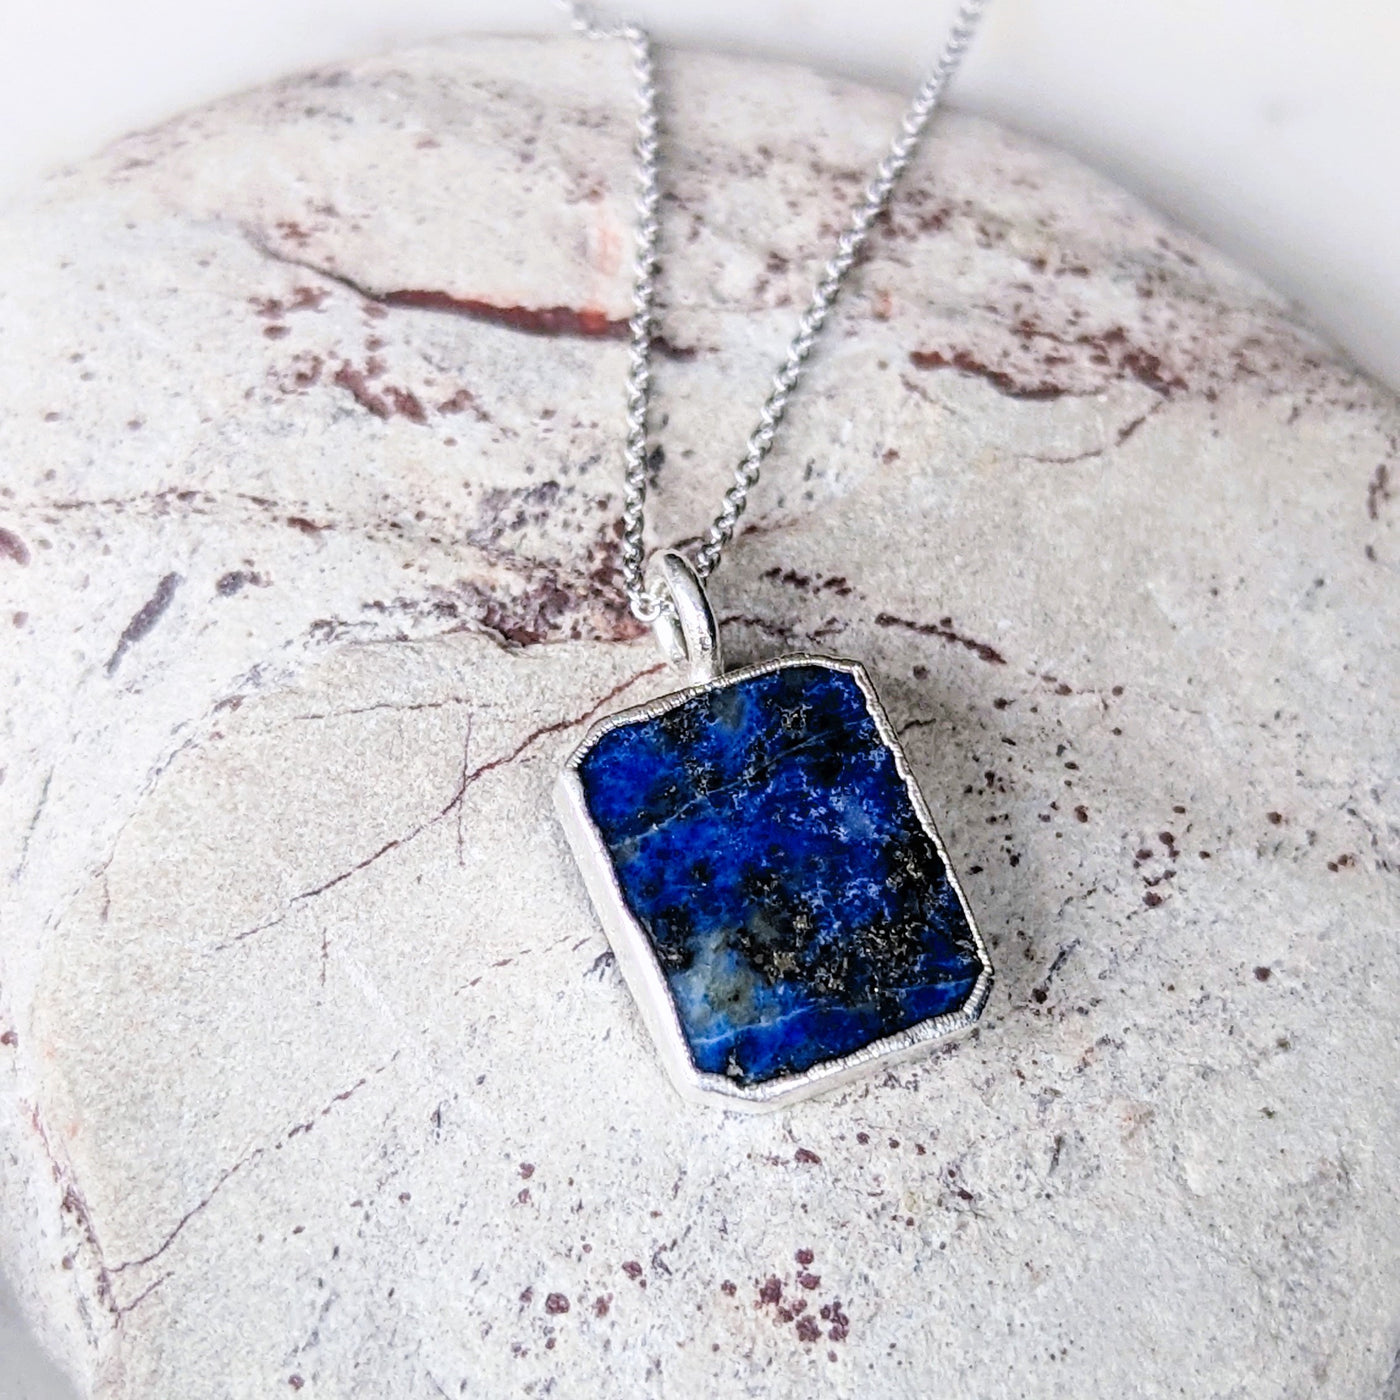 The Rectangle Lapis Lazuli Gemstone Necklace - Sterling Silver